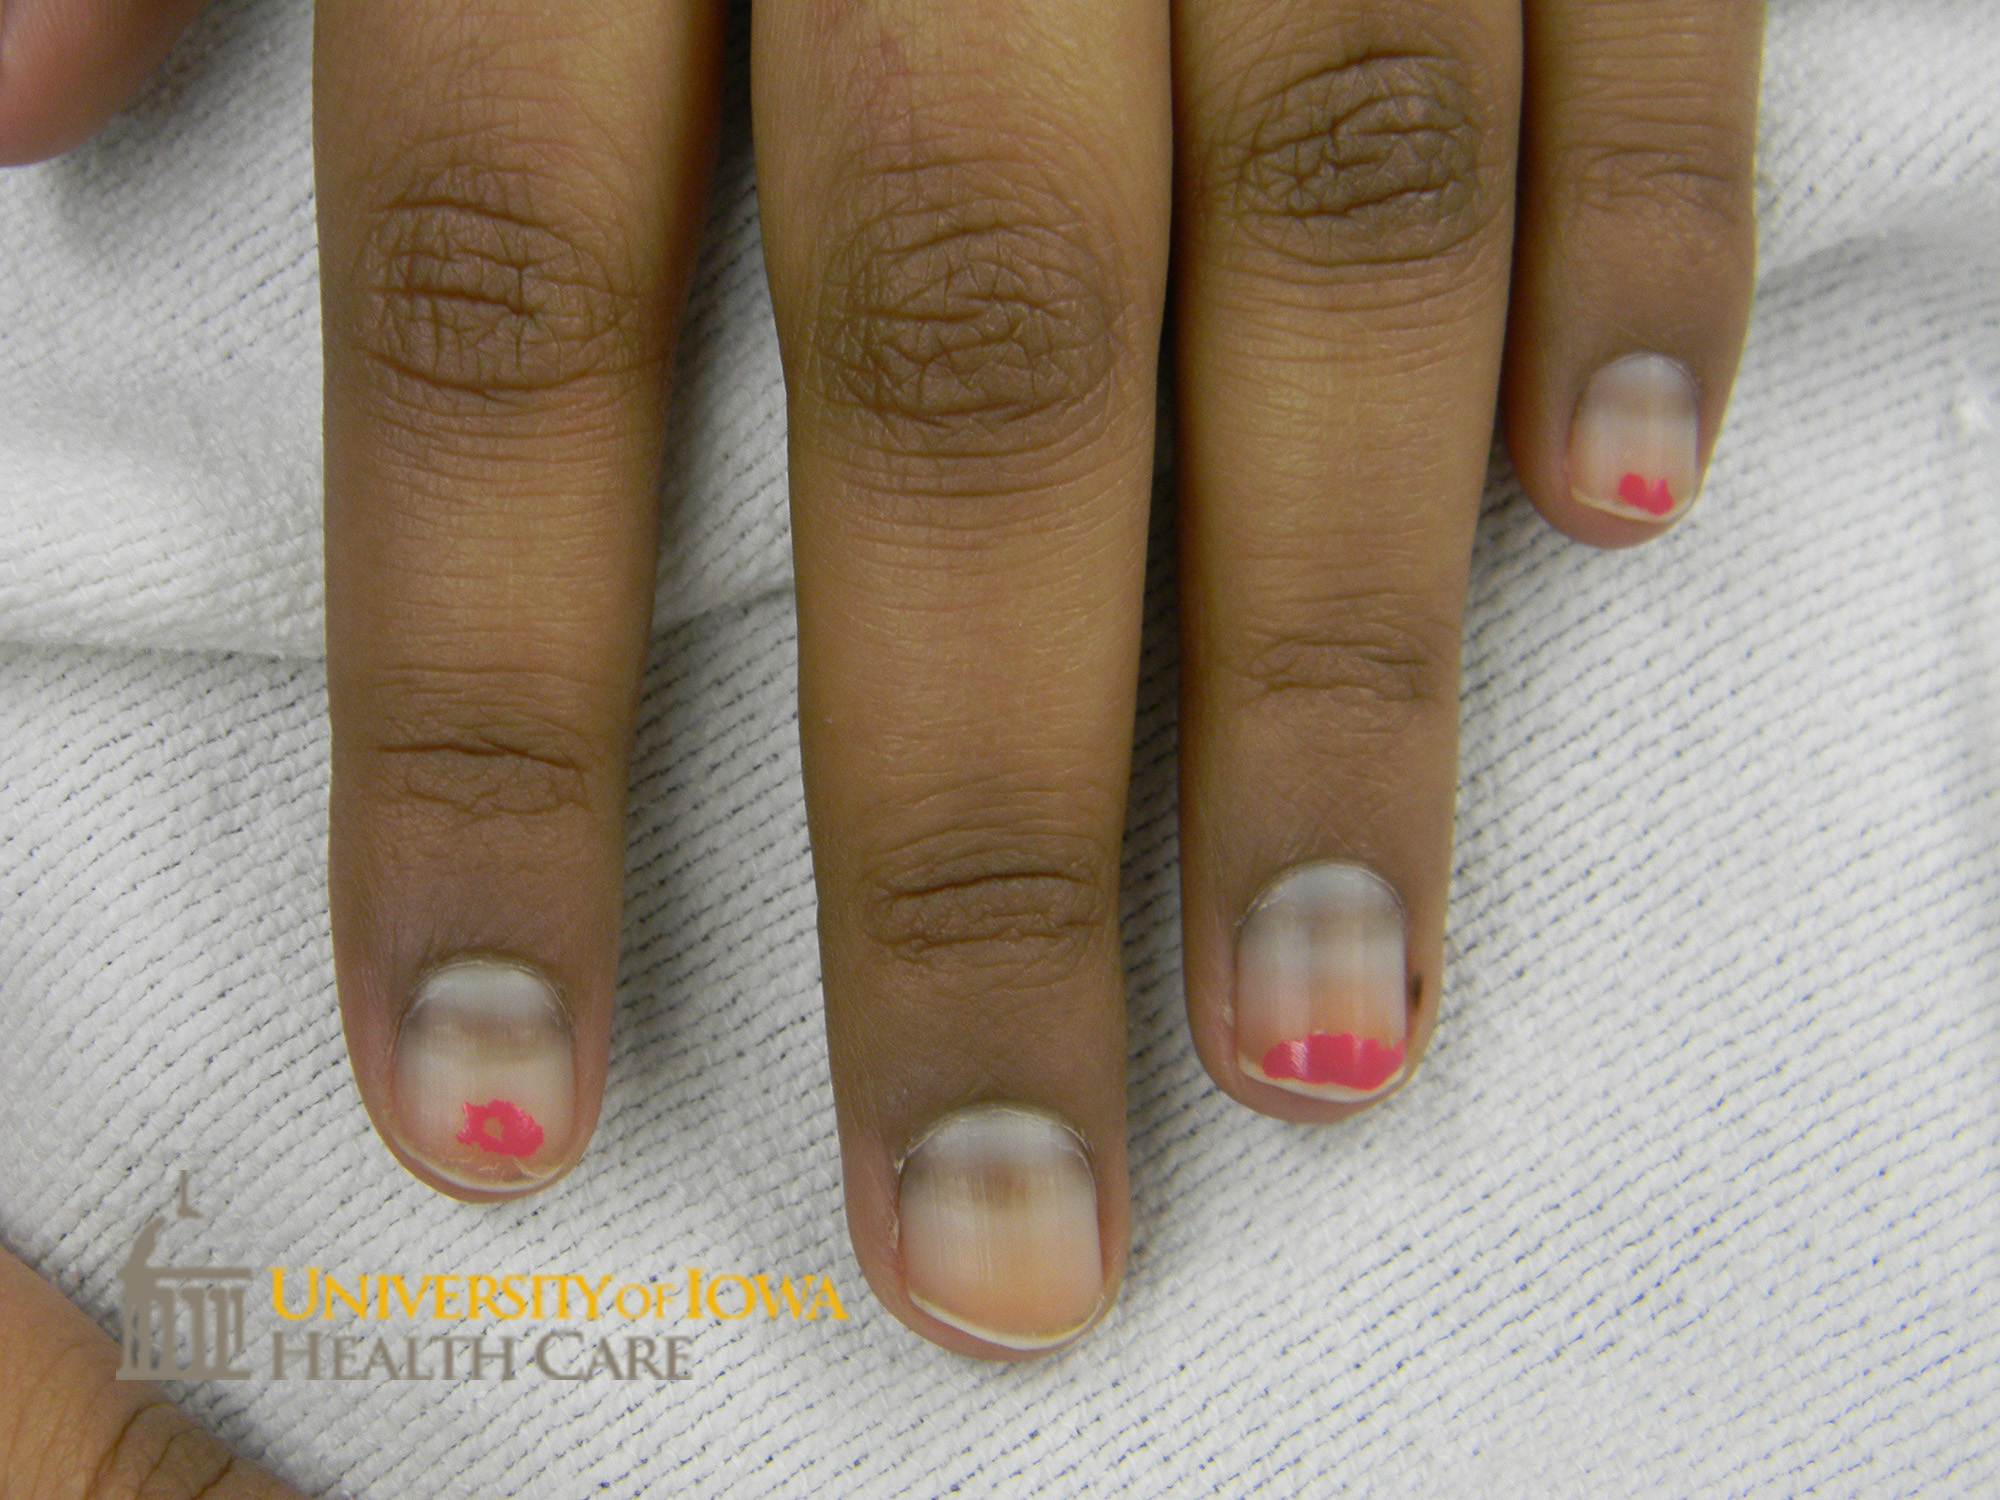 A transverse brown band on the proximal fingernails. (click images for higher resolution).